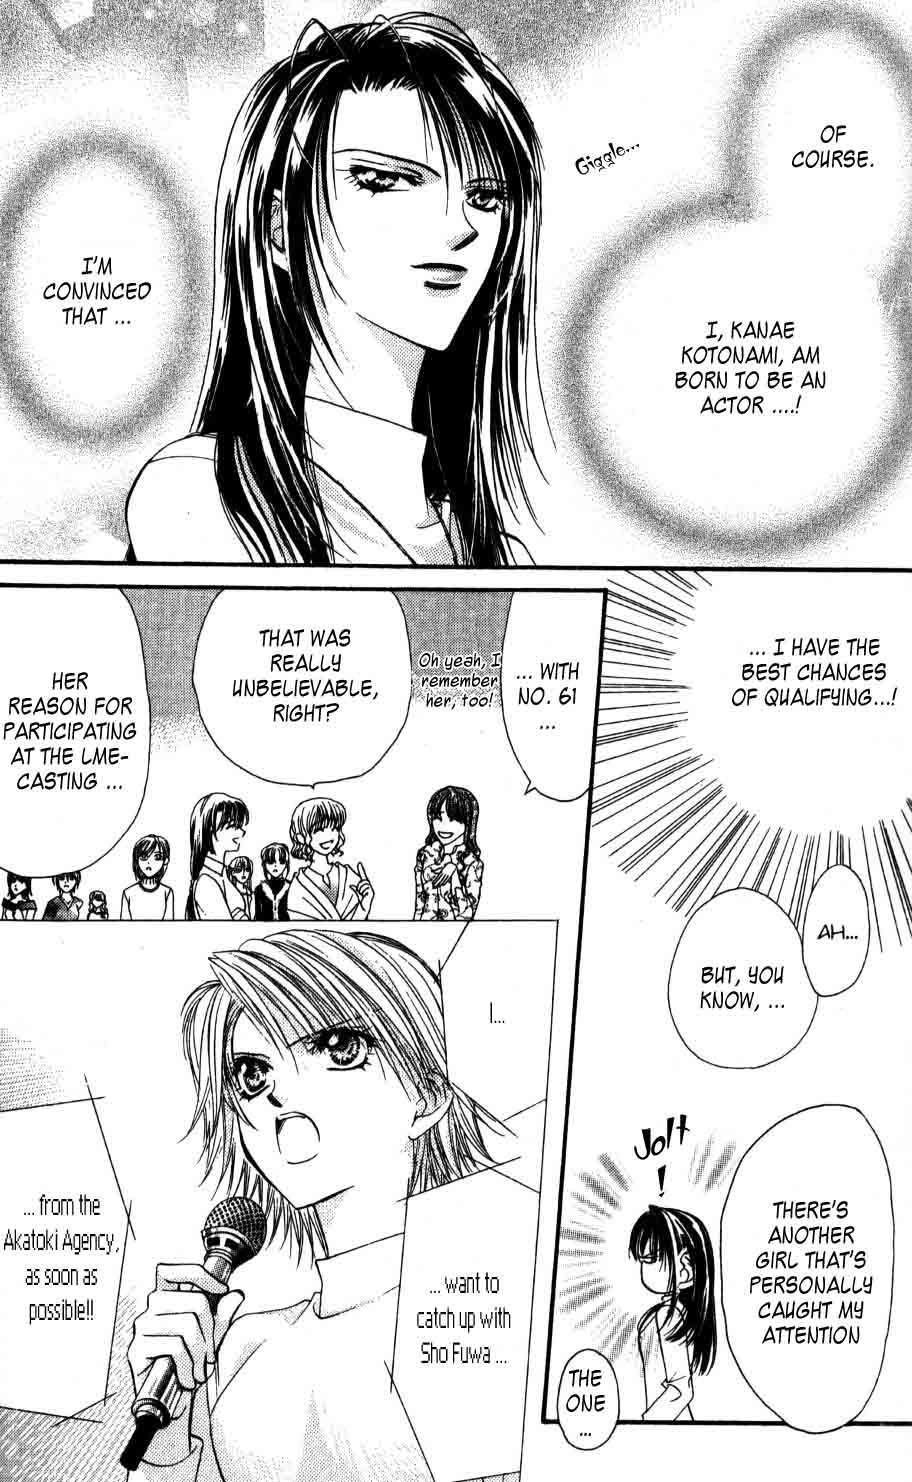 Skip Beat!, Chapter 4 The Feast of Horror, part 2 image 06